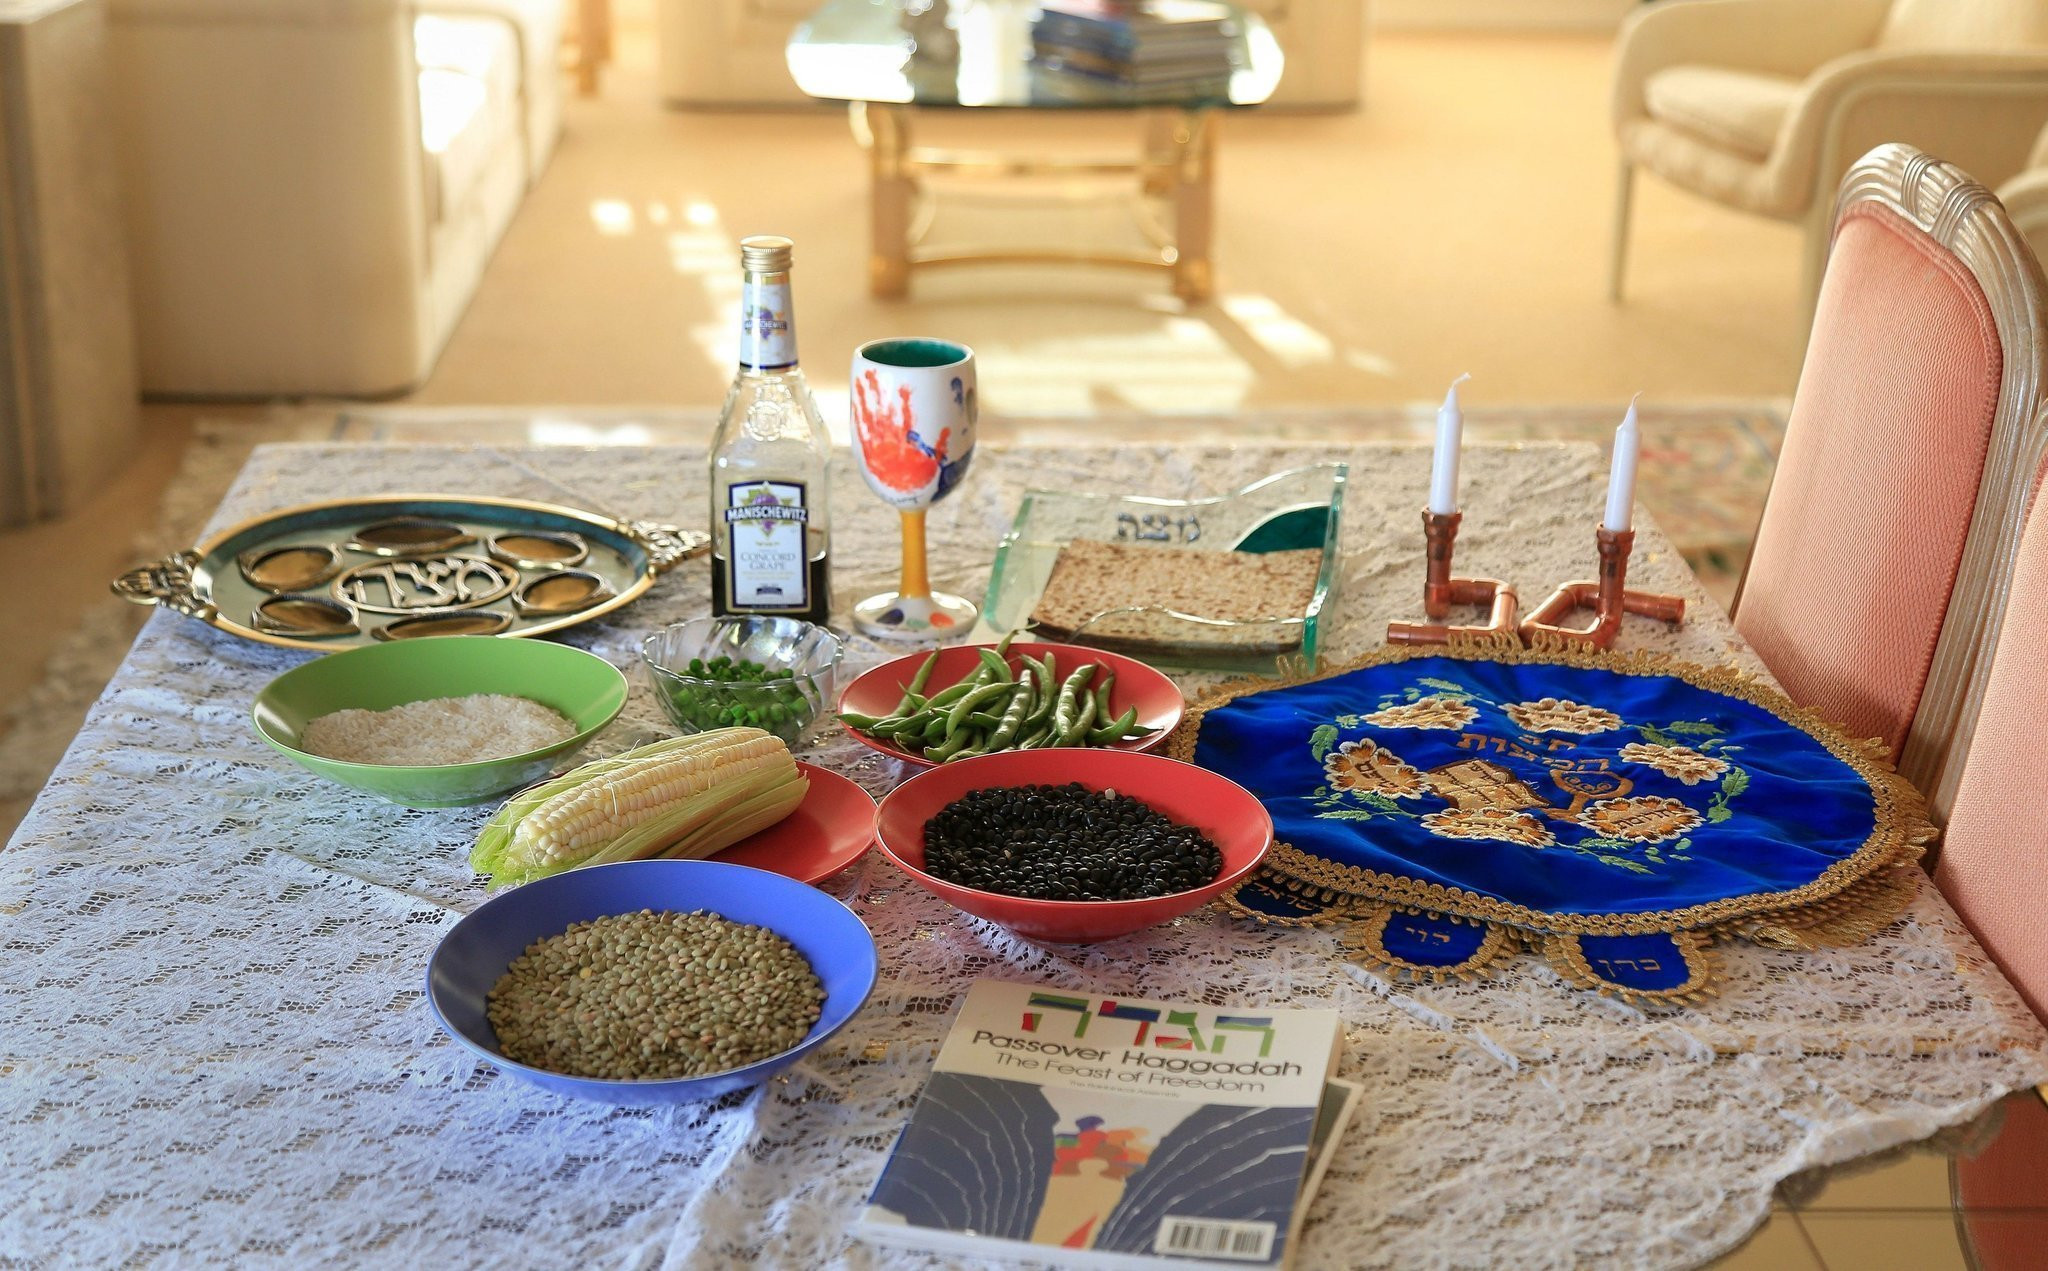 Passover Food Restriction
 Passover to include new food options this year The San